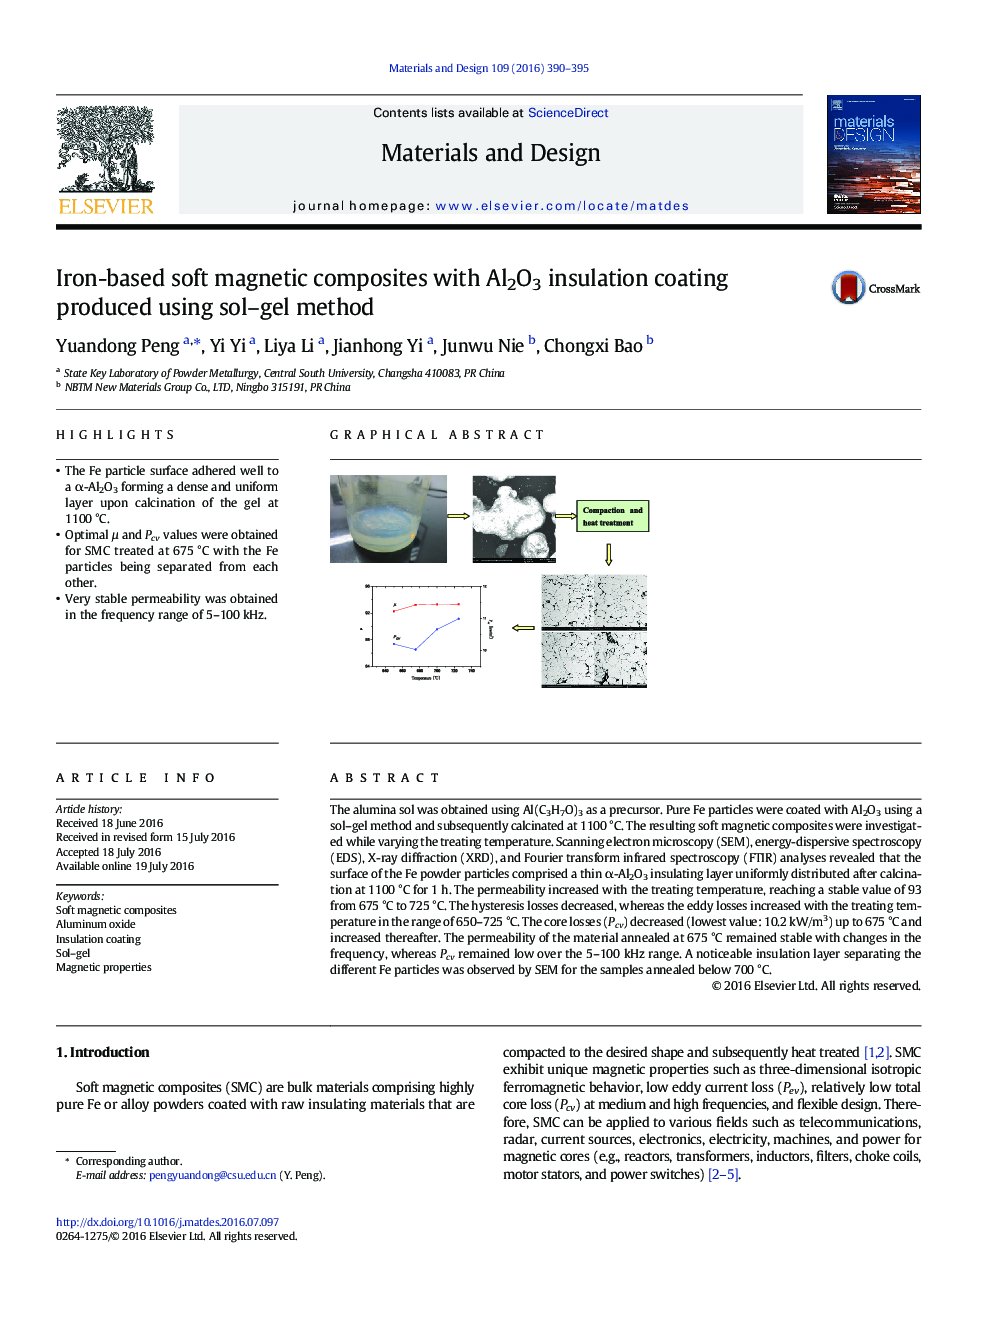 Iron-based soft magnetic composites with Al2O3 insulation coating produced using sol–gel method